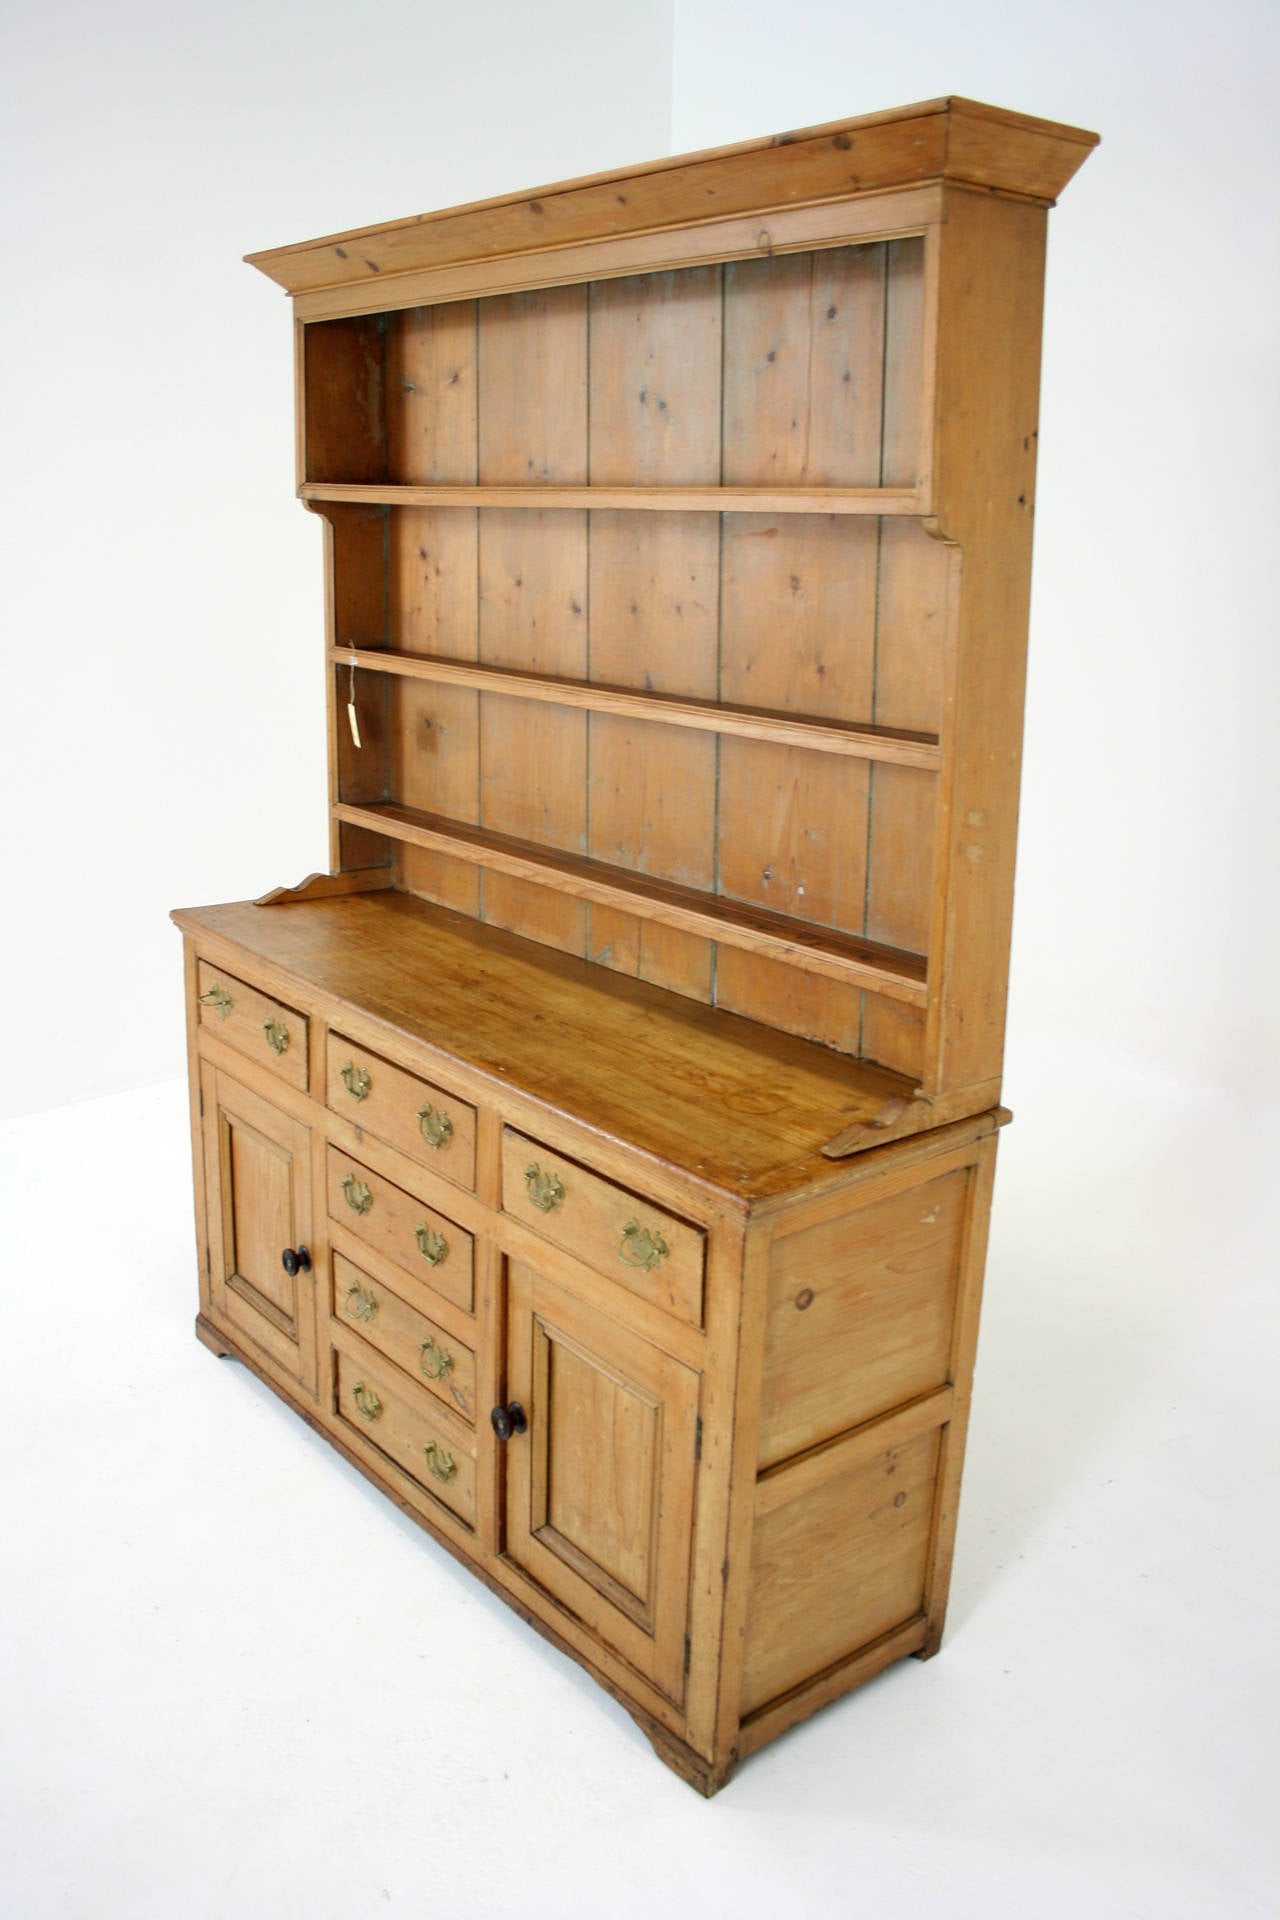 - Wide shaped cornice
 - Top section with panelled back
 - Three open shelves
 - Cupboard base with six dovetailed drawers
 - Two panelled doors with plenty of storage
 - Brass handles, not original
 - Some minor scratches and cracks
 - Top: